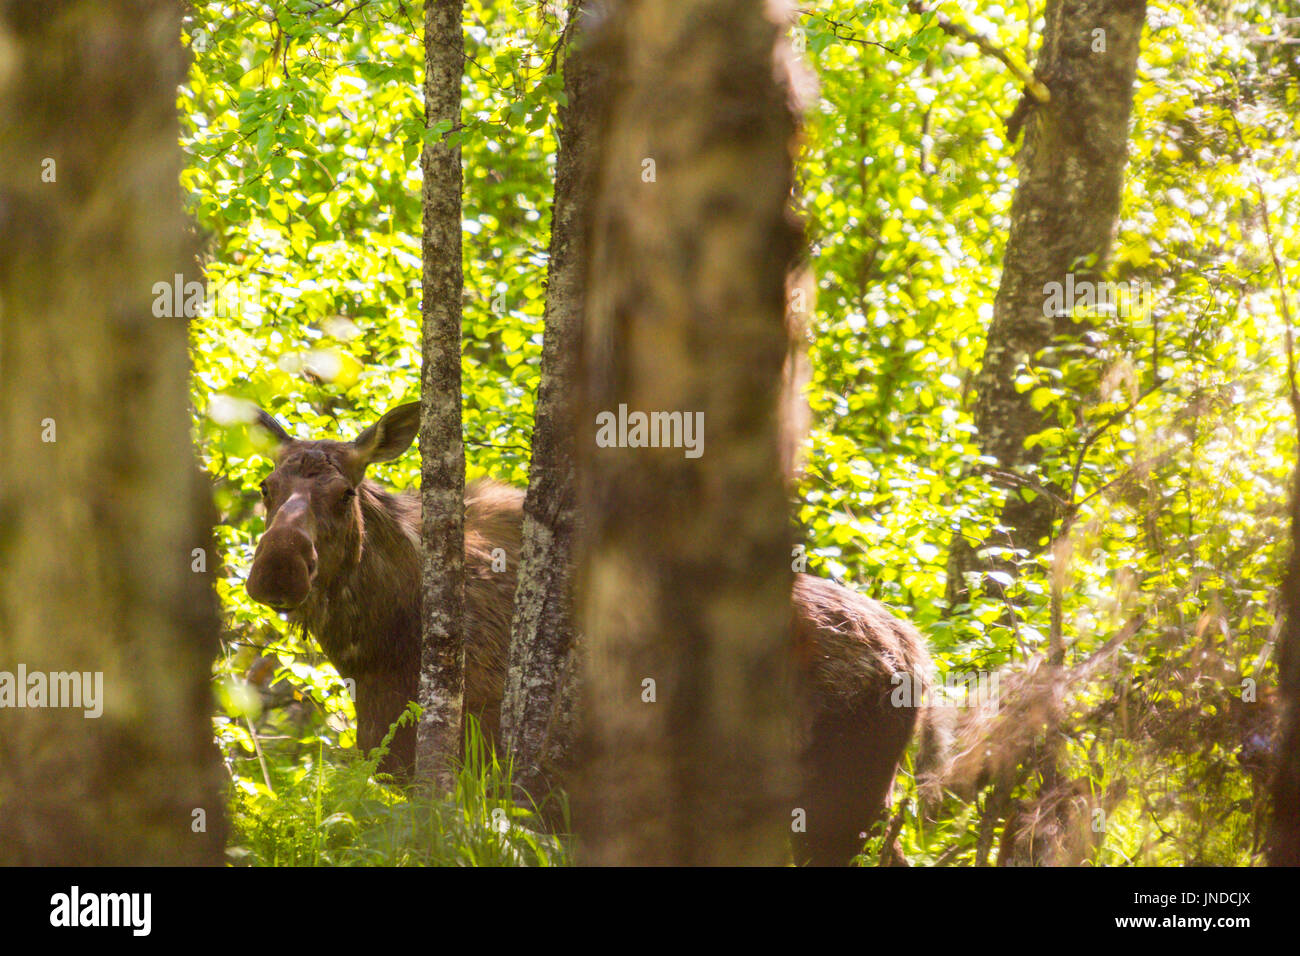 Moose in a forest, Homer, Alaska, USA Stock Photo